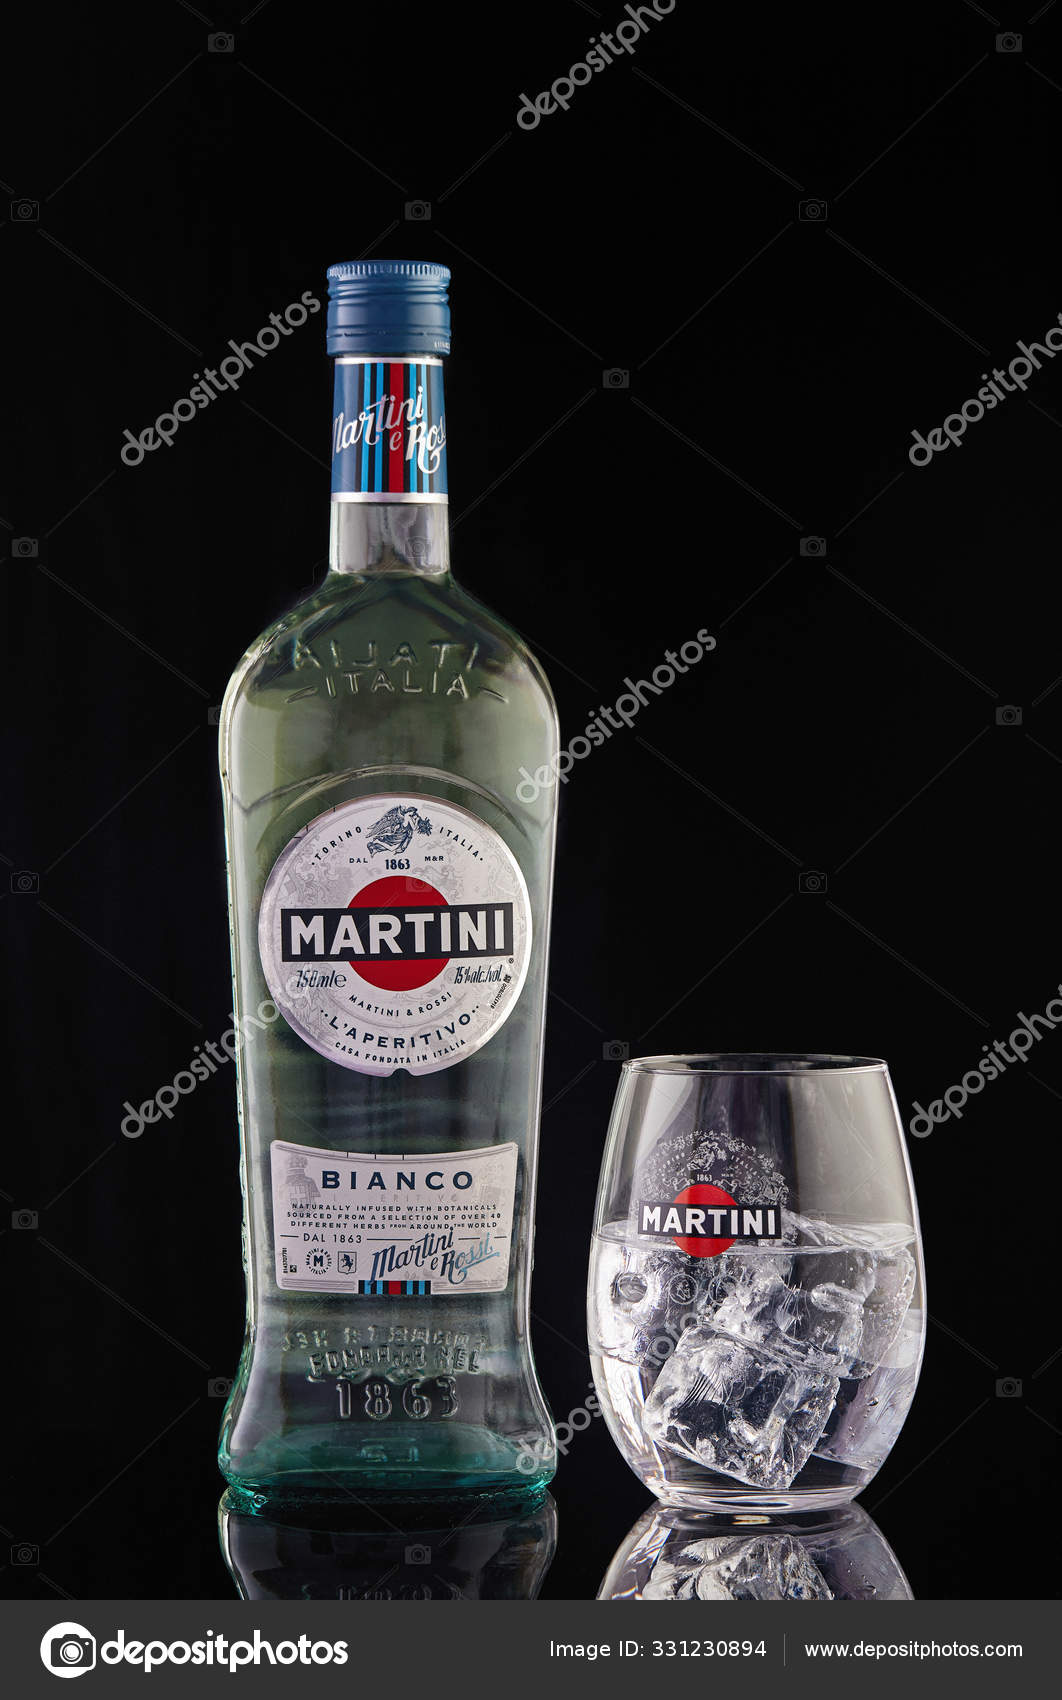 Martini bottle and martini glass with ice isolated on a reflection. – Stock Editorial Photo AlexDon24 #331230894